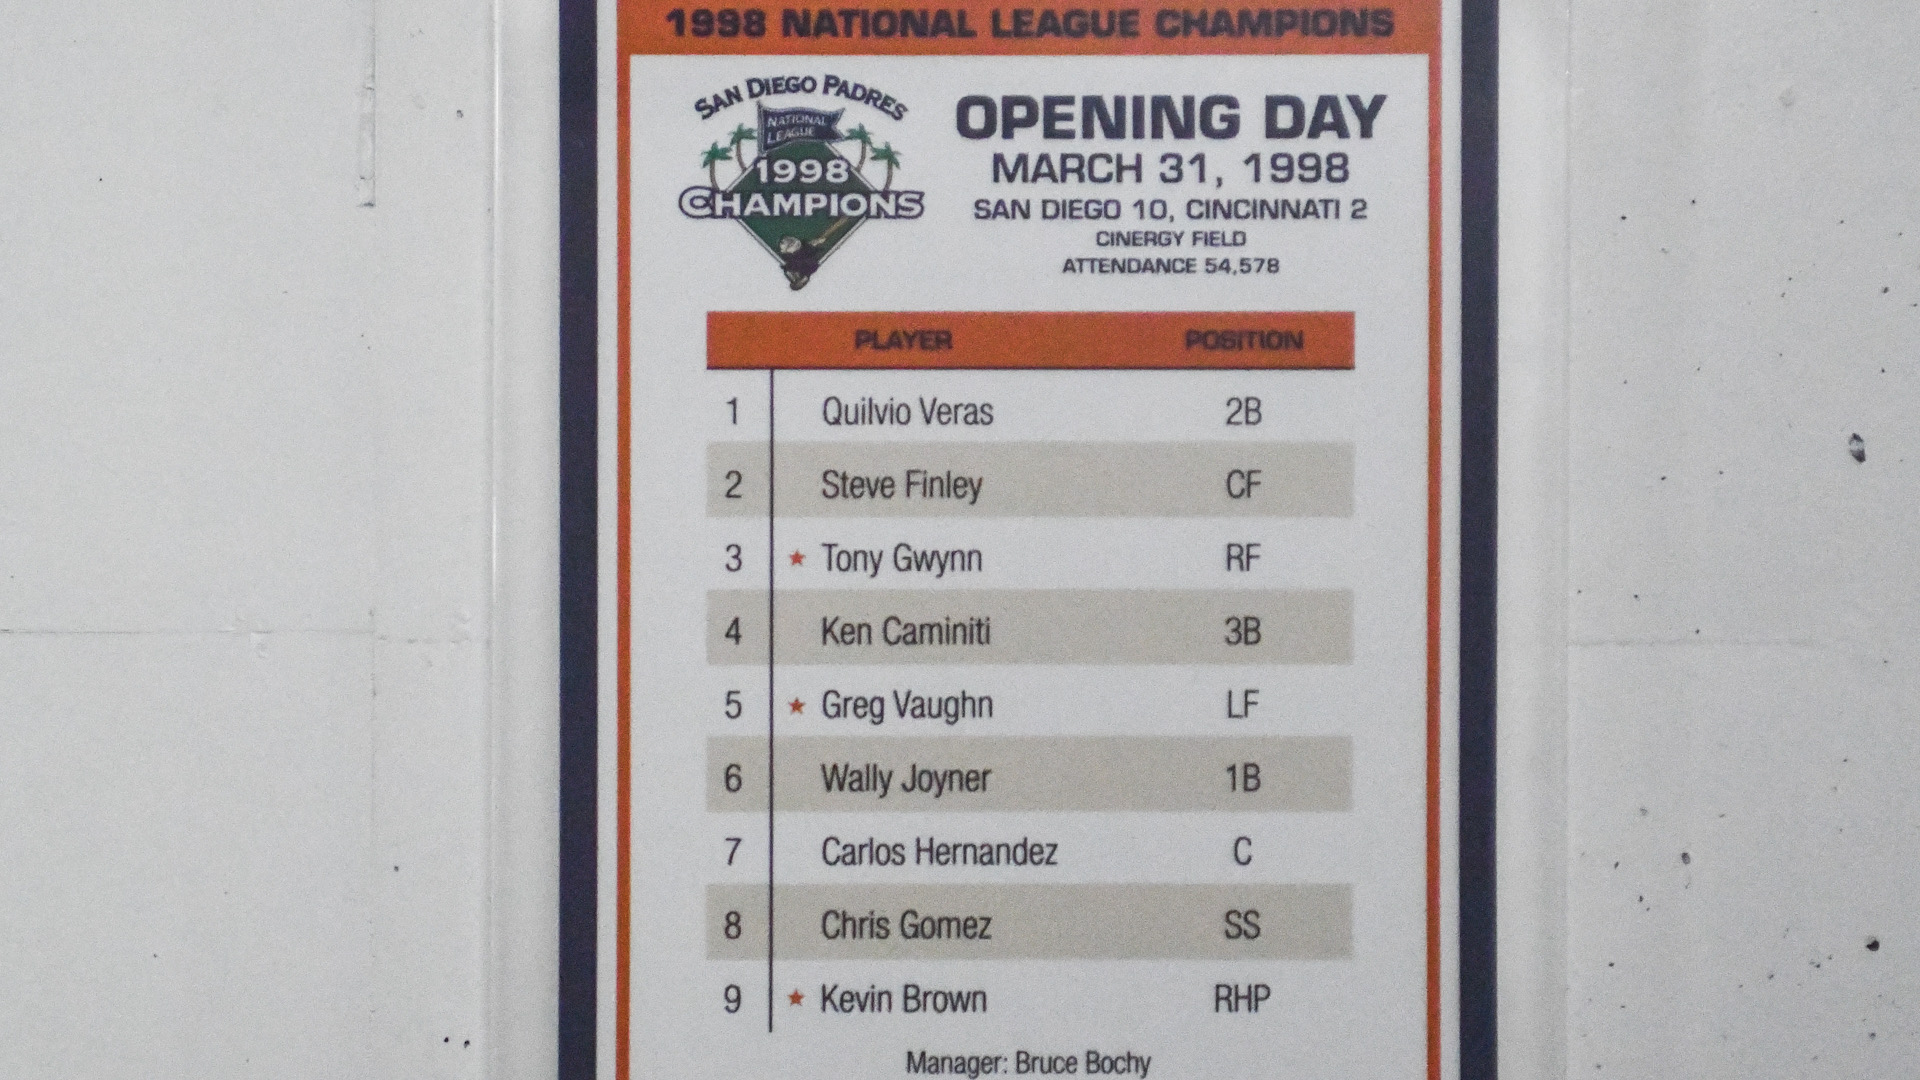 San Diego Padres 1998 Opening Day lineup card inside Petco Park in San Diego CA.